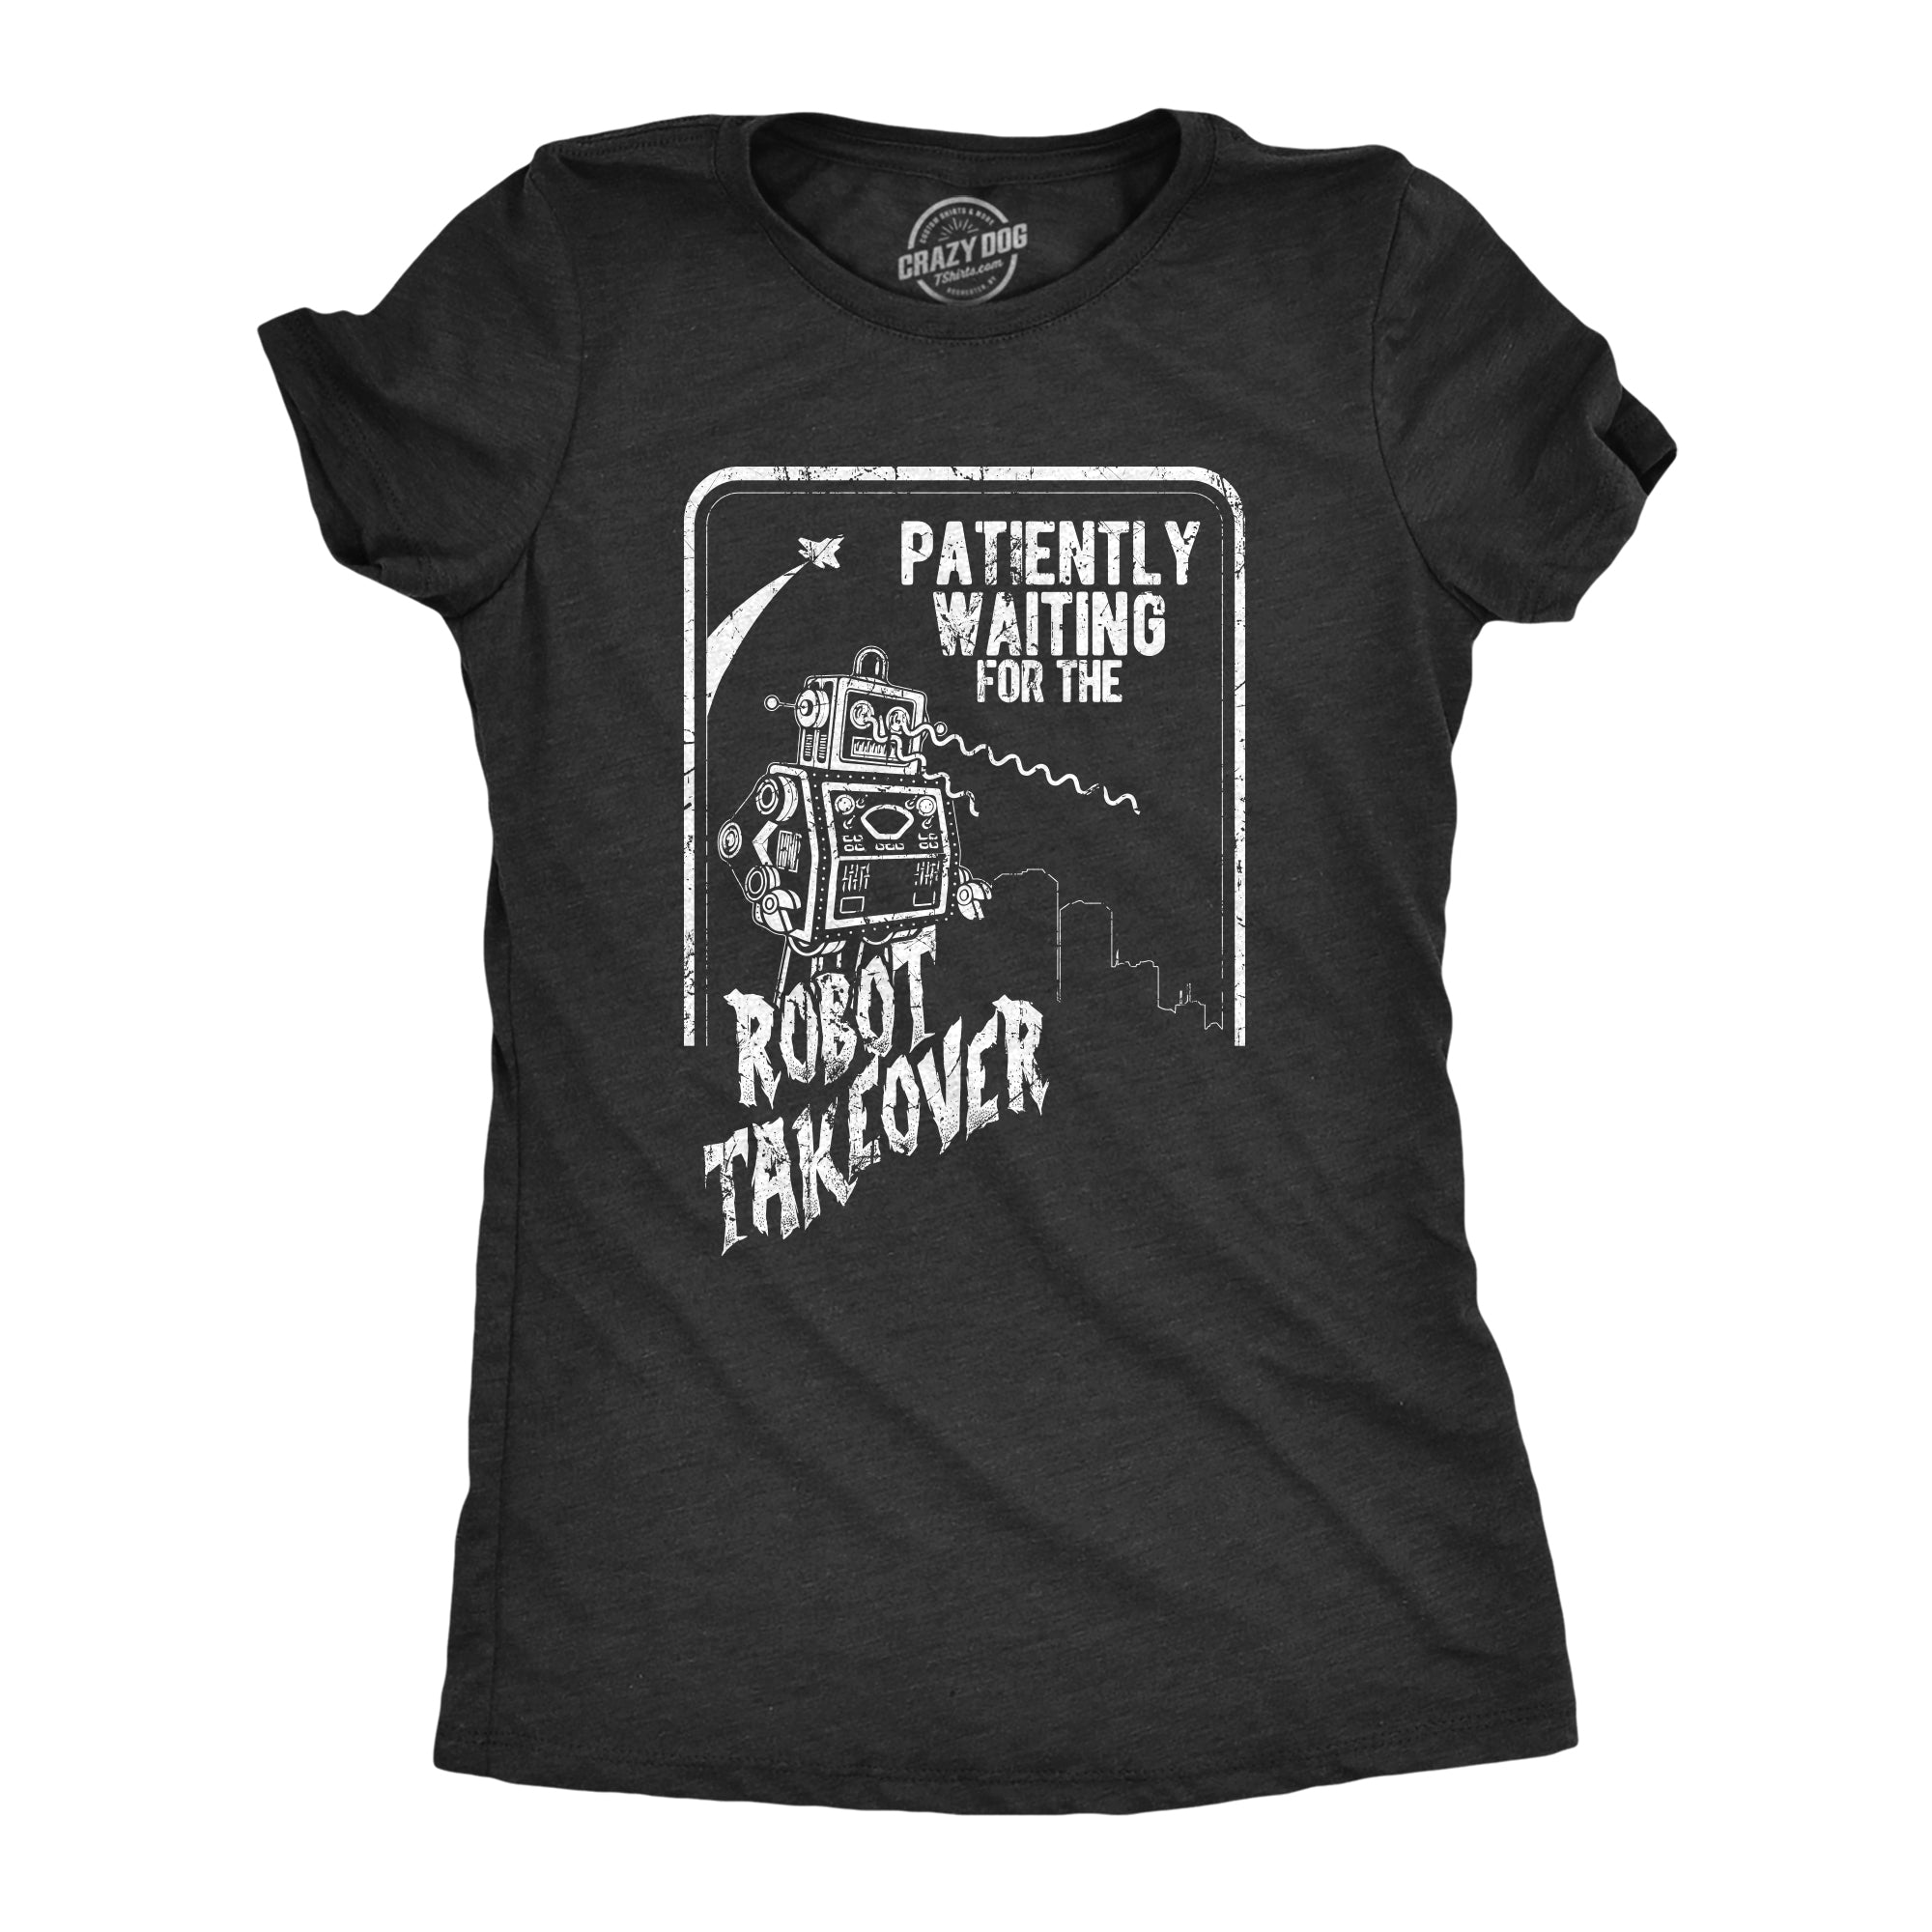 Funny Heather Black - ROBOT Patiently Waiting For The Robot Takeover Womens T Shirt Nerdy Sarcastic Tee